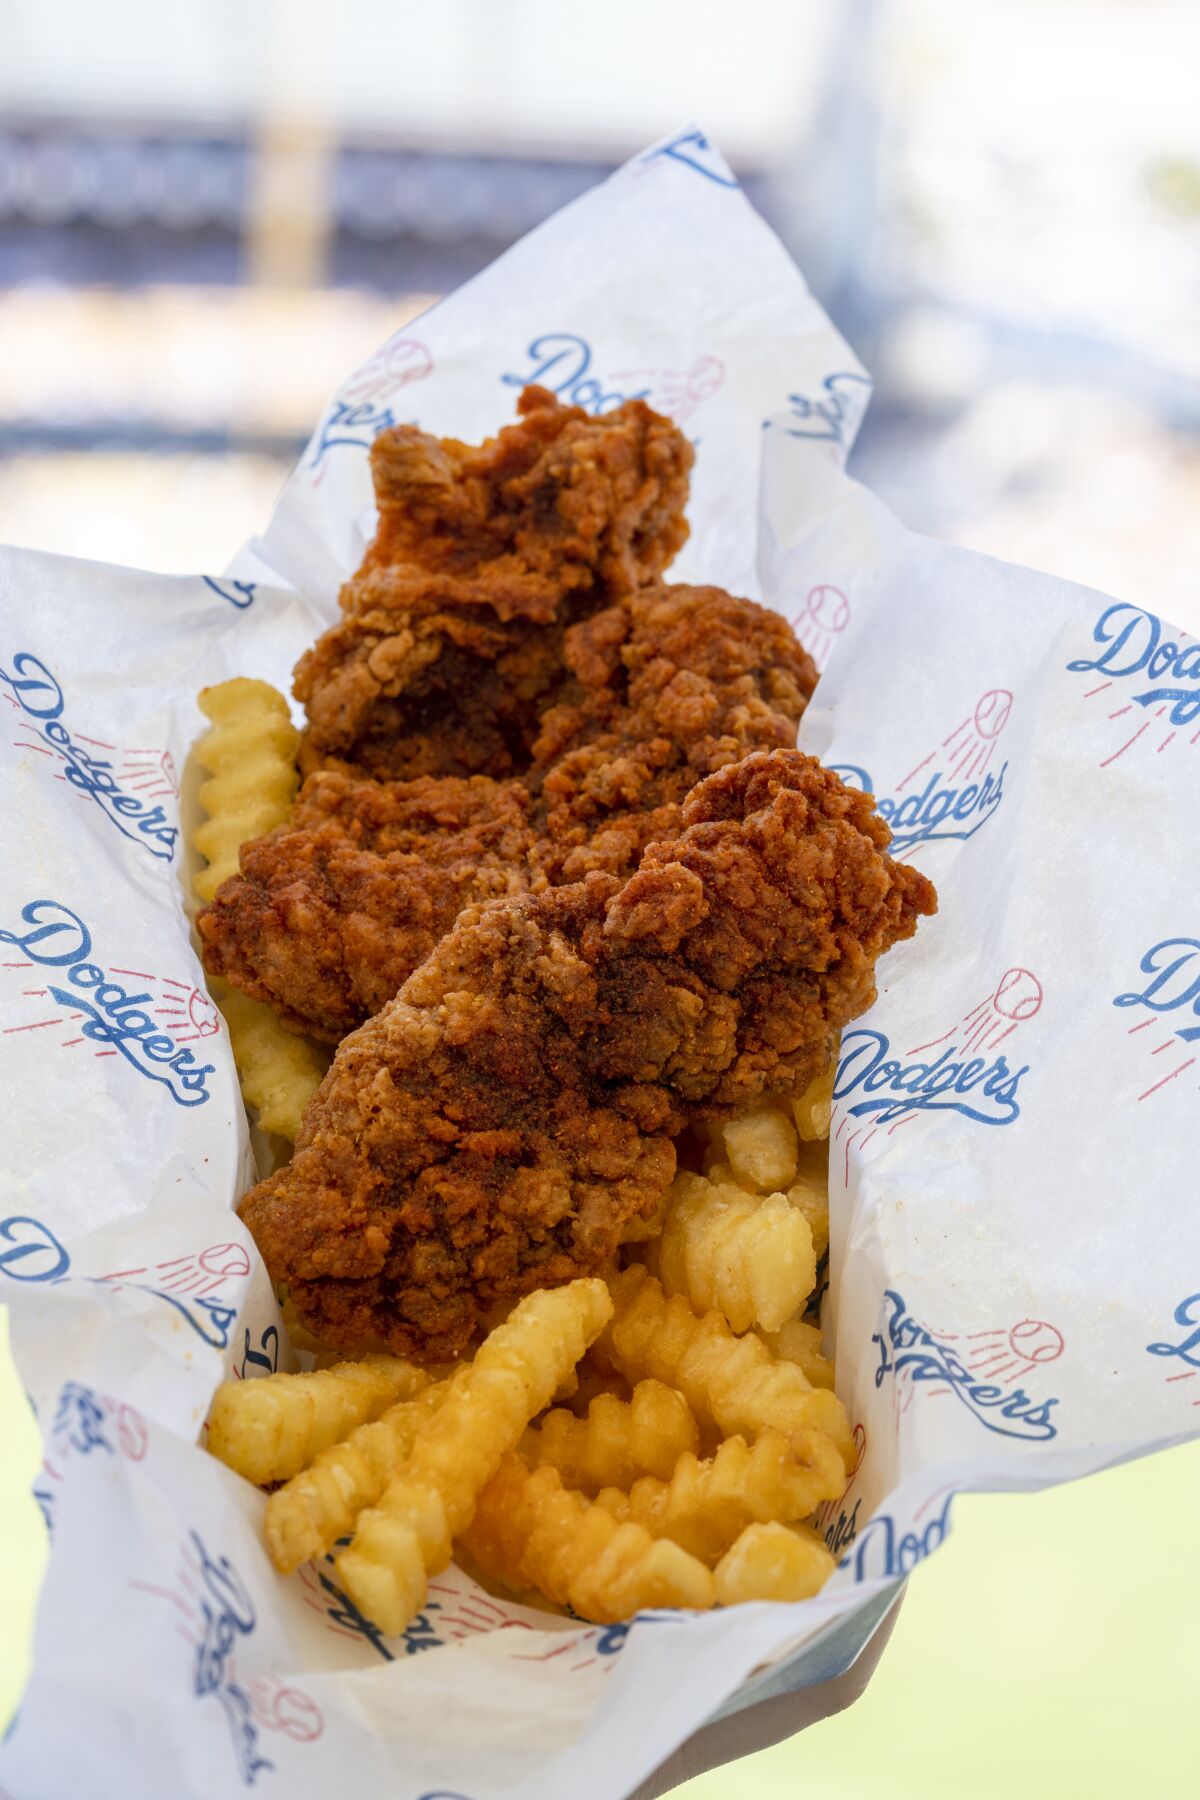 Nashville Hot Chicken tenders located in the field section at Sweet Chick at Dodger Stadium.